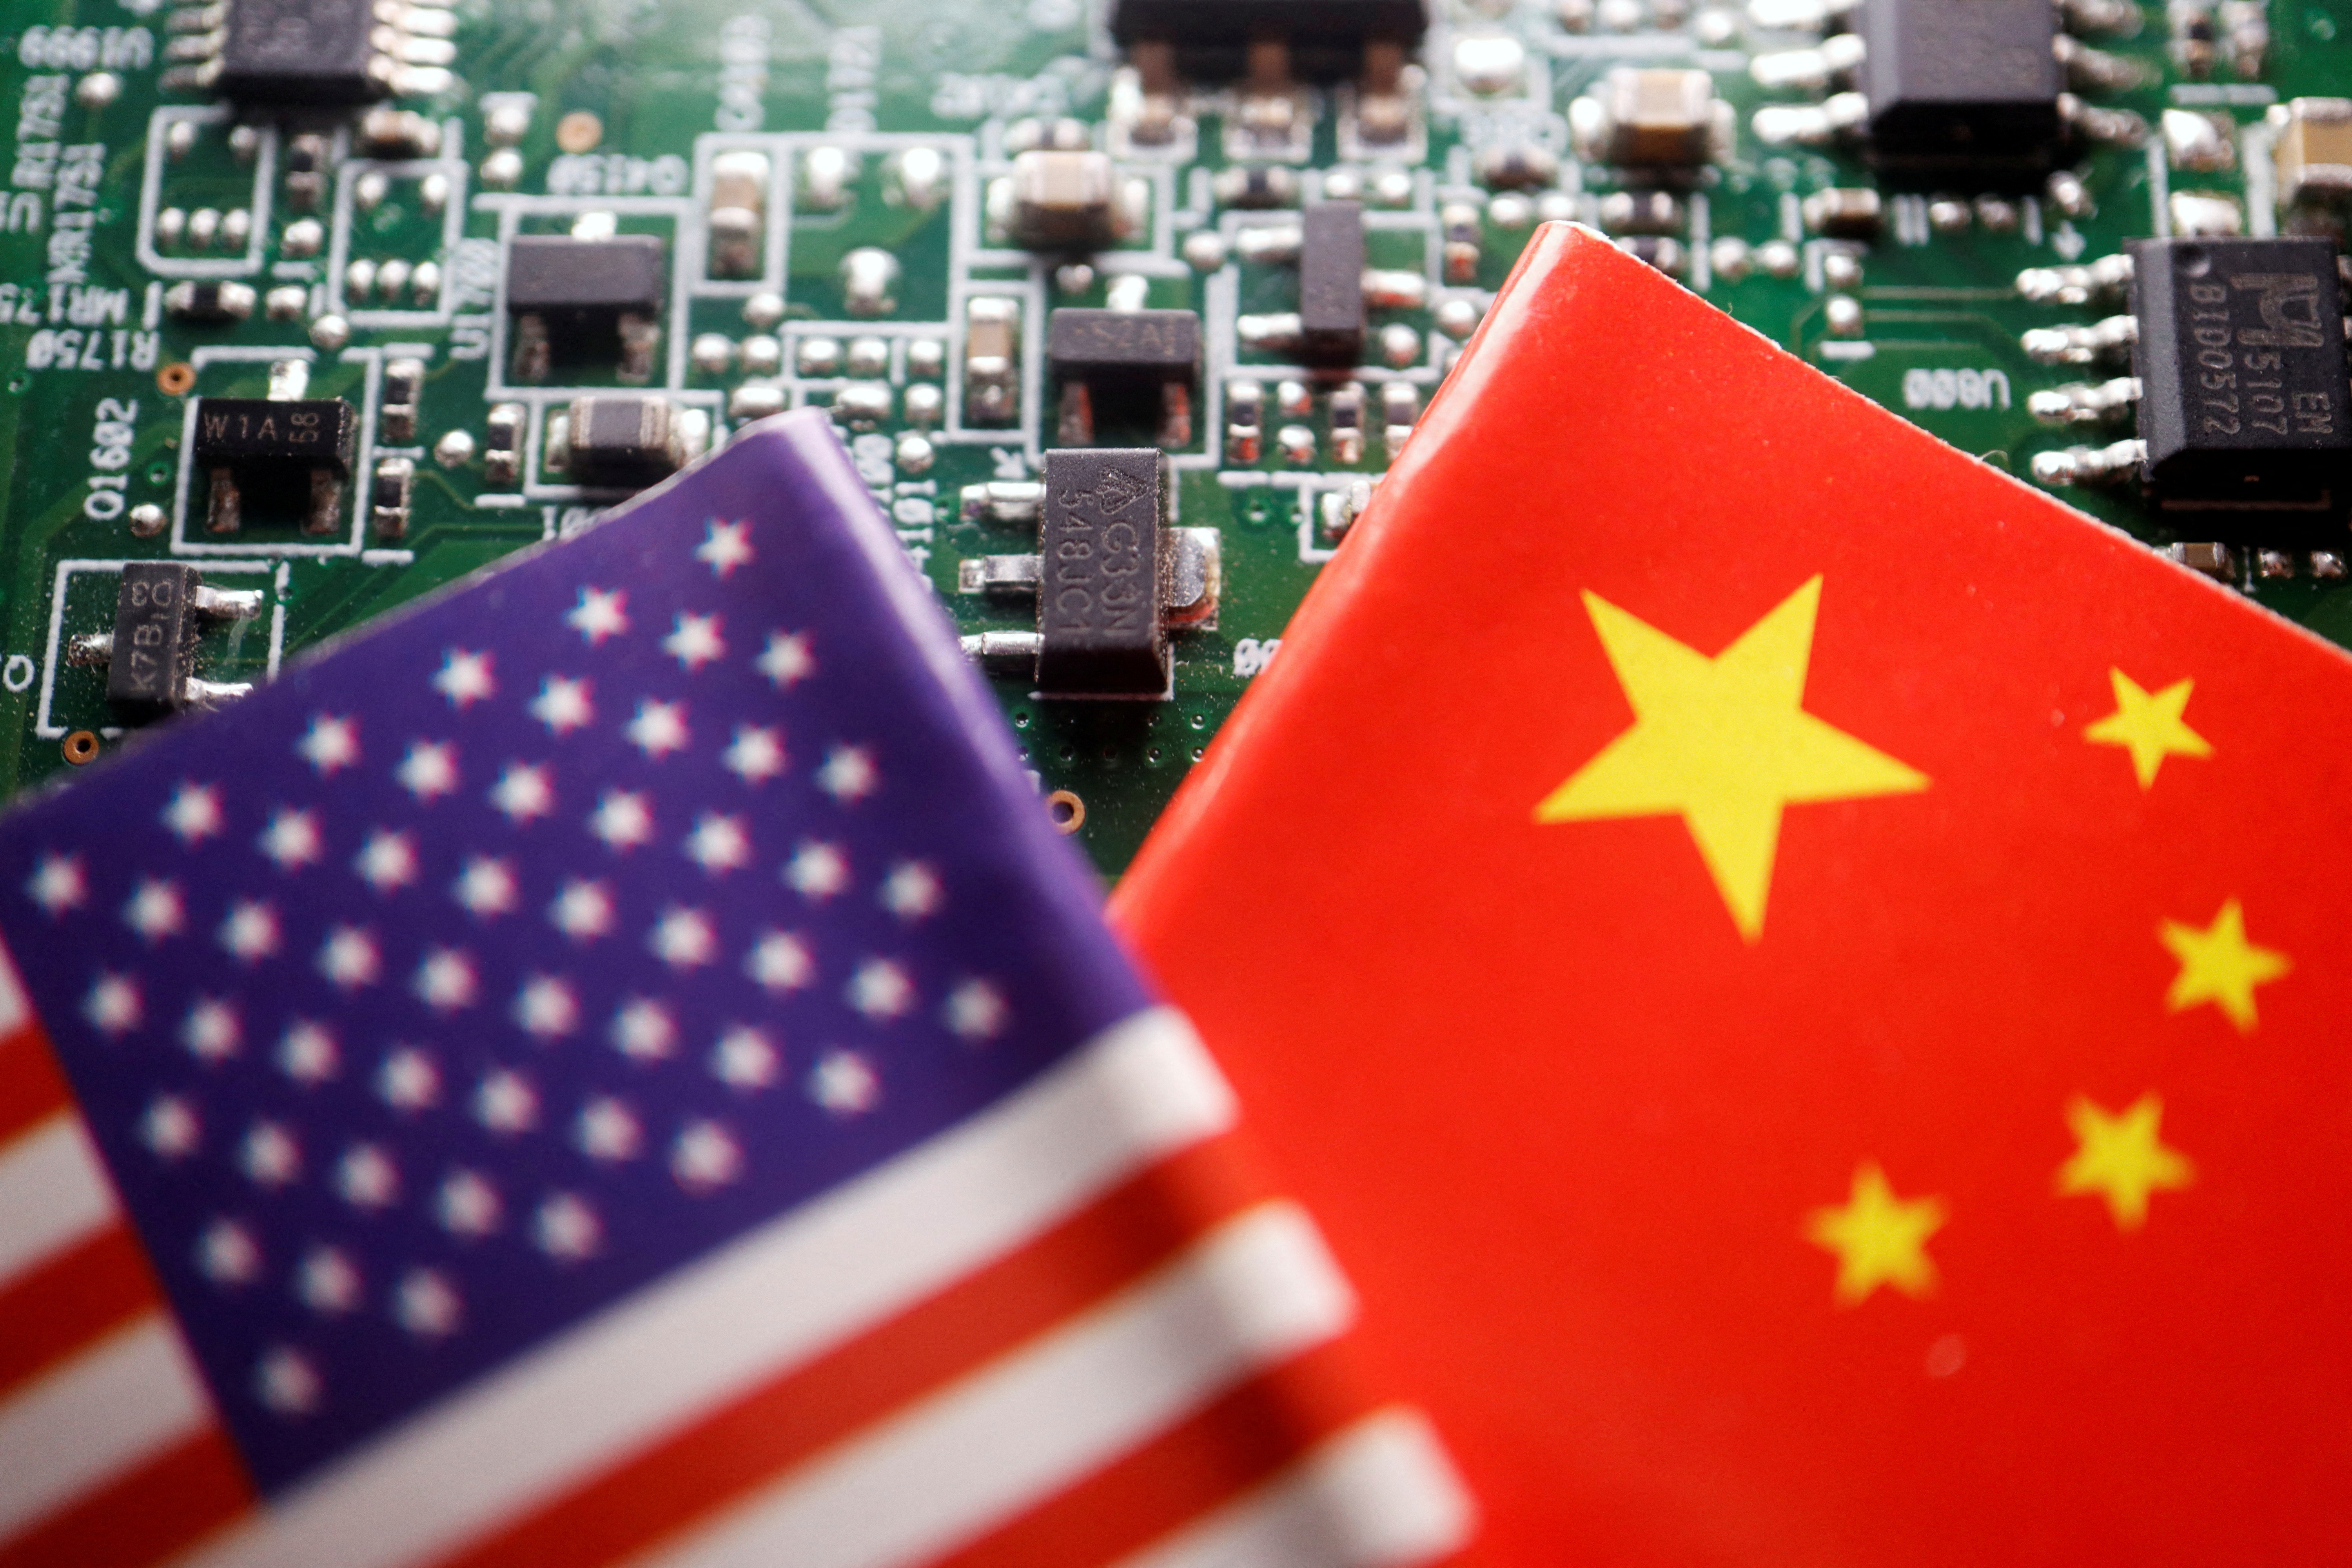 Illustration picture of Chinese and U.S. flags with semiconductor chips